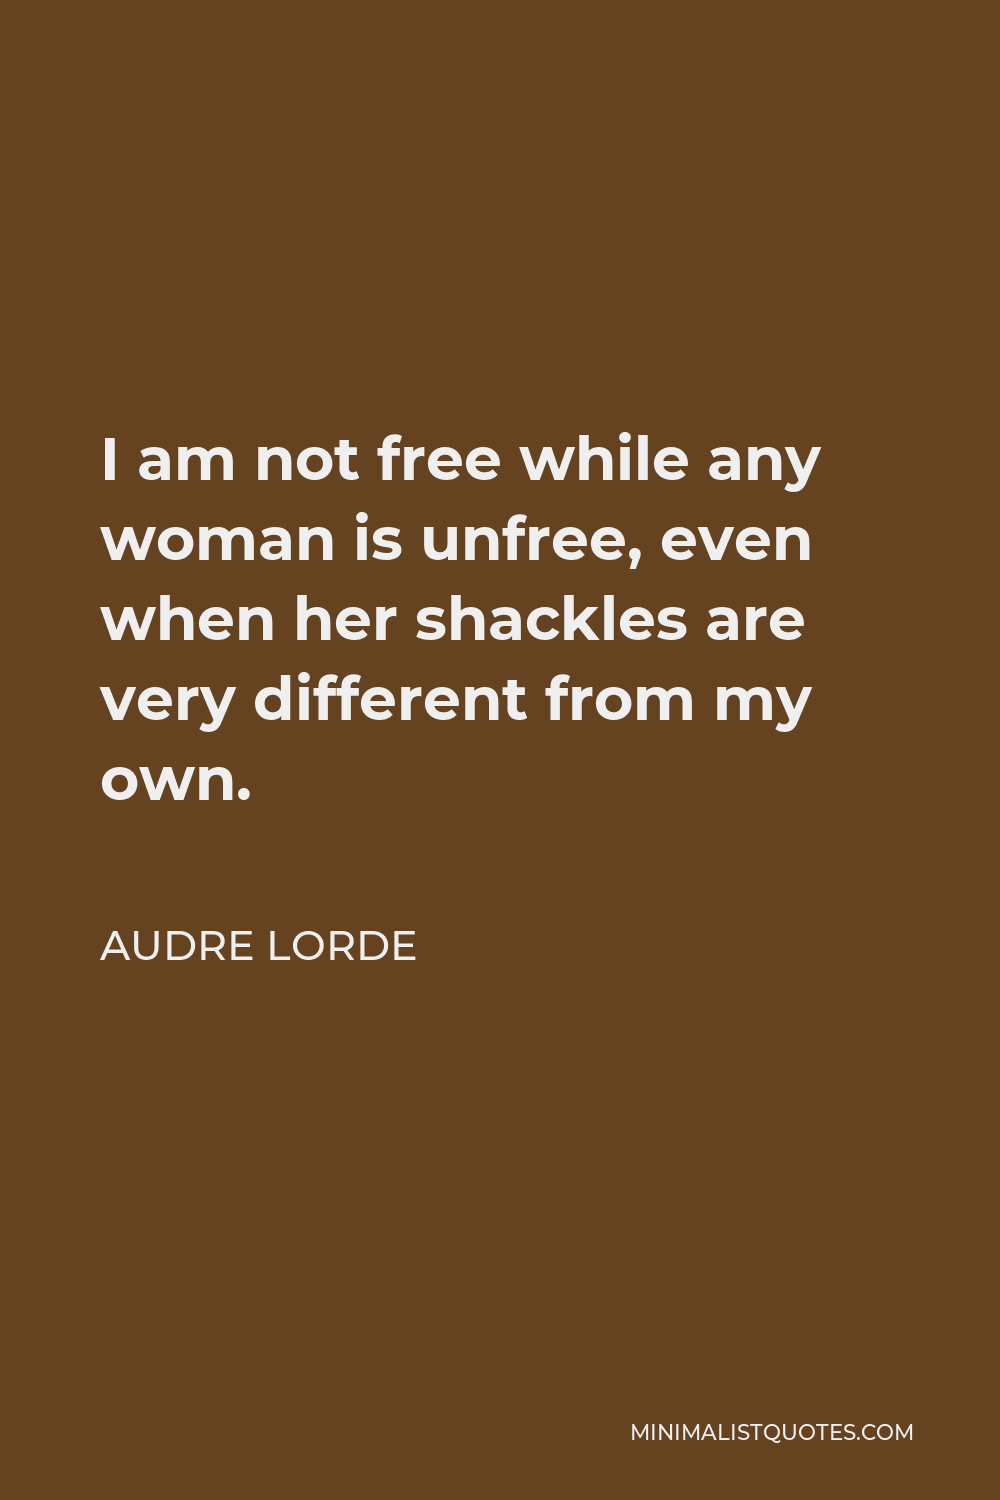 Audre Lorde Quote - I am not free while any woman is unfree, even when her shackles are very different from my own.